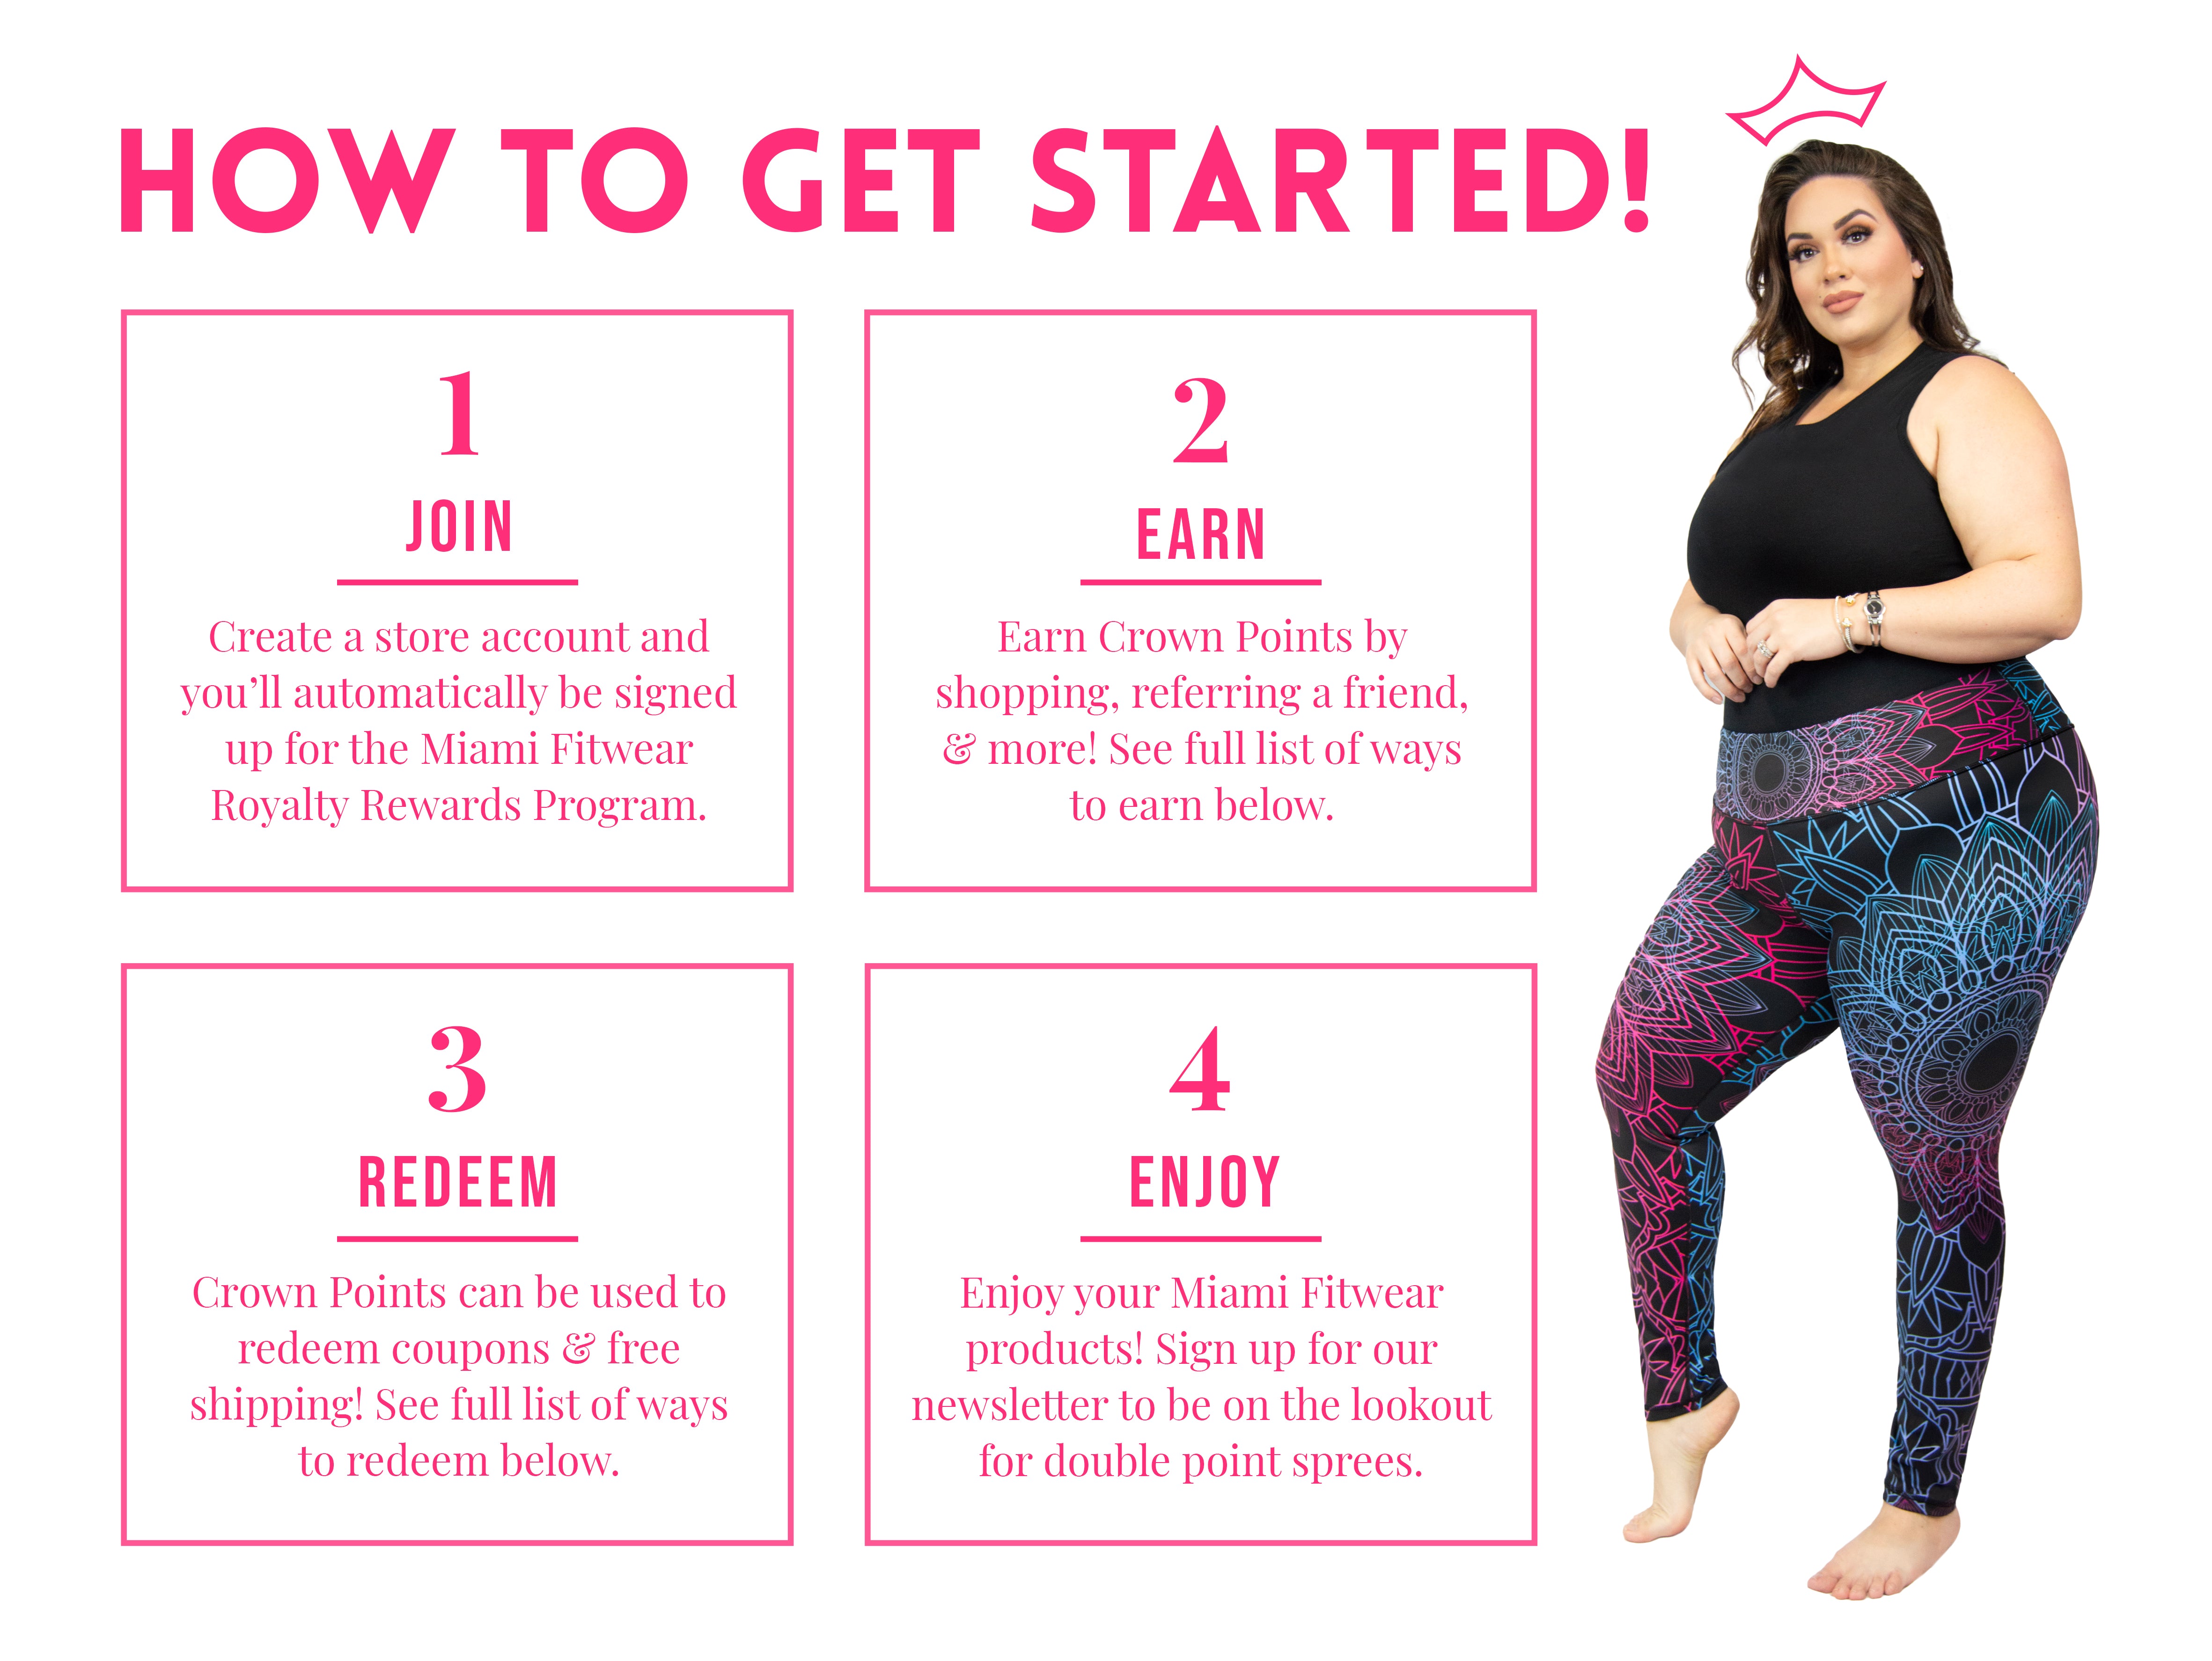 How to Get Started! One: Join. Create a store account and you'll automatically be signed up for the Miami Fitwear Royalty Rewards Program. Two: Earn. Earn Crown Points by shopping, referring a friend, & more! See full list of ways to earn below. Three: Redeem. Crown Points can be used to redeem coupons & free shipping! See full list of ways to redeem below. Four: Enjoy. Enjoy your Miami Fitwear products! Sign up for our newsletter to be on the lookout for double point sprees. On the right-hand side, a plus-sized woman wearing a black tank top and black Miami Fitwear leggings decorated with intricate mandalas in bright pink and cyan hues is shown. She is posing with one toe pointed on the ground and her hands brought forward above her stomach. A crown symbol floats above her head.